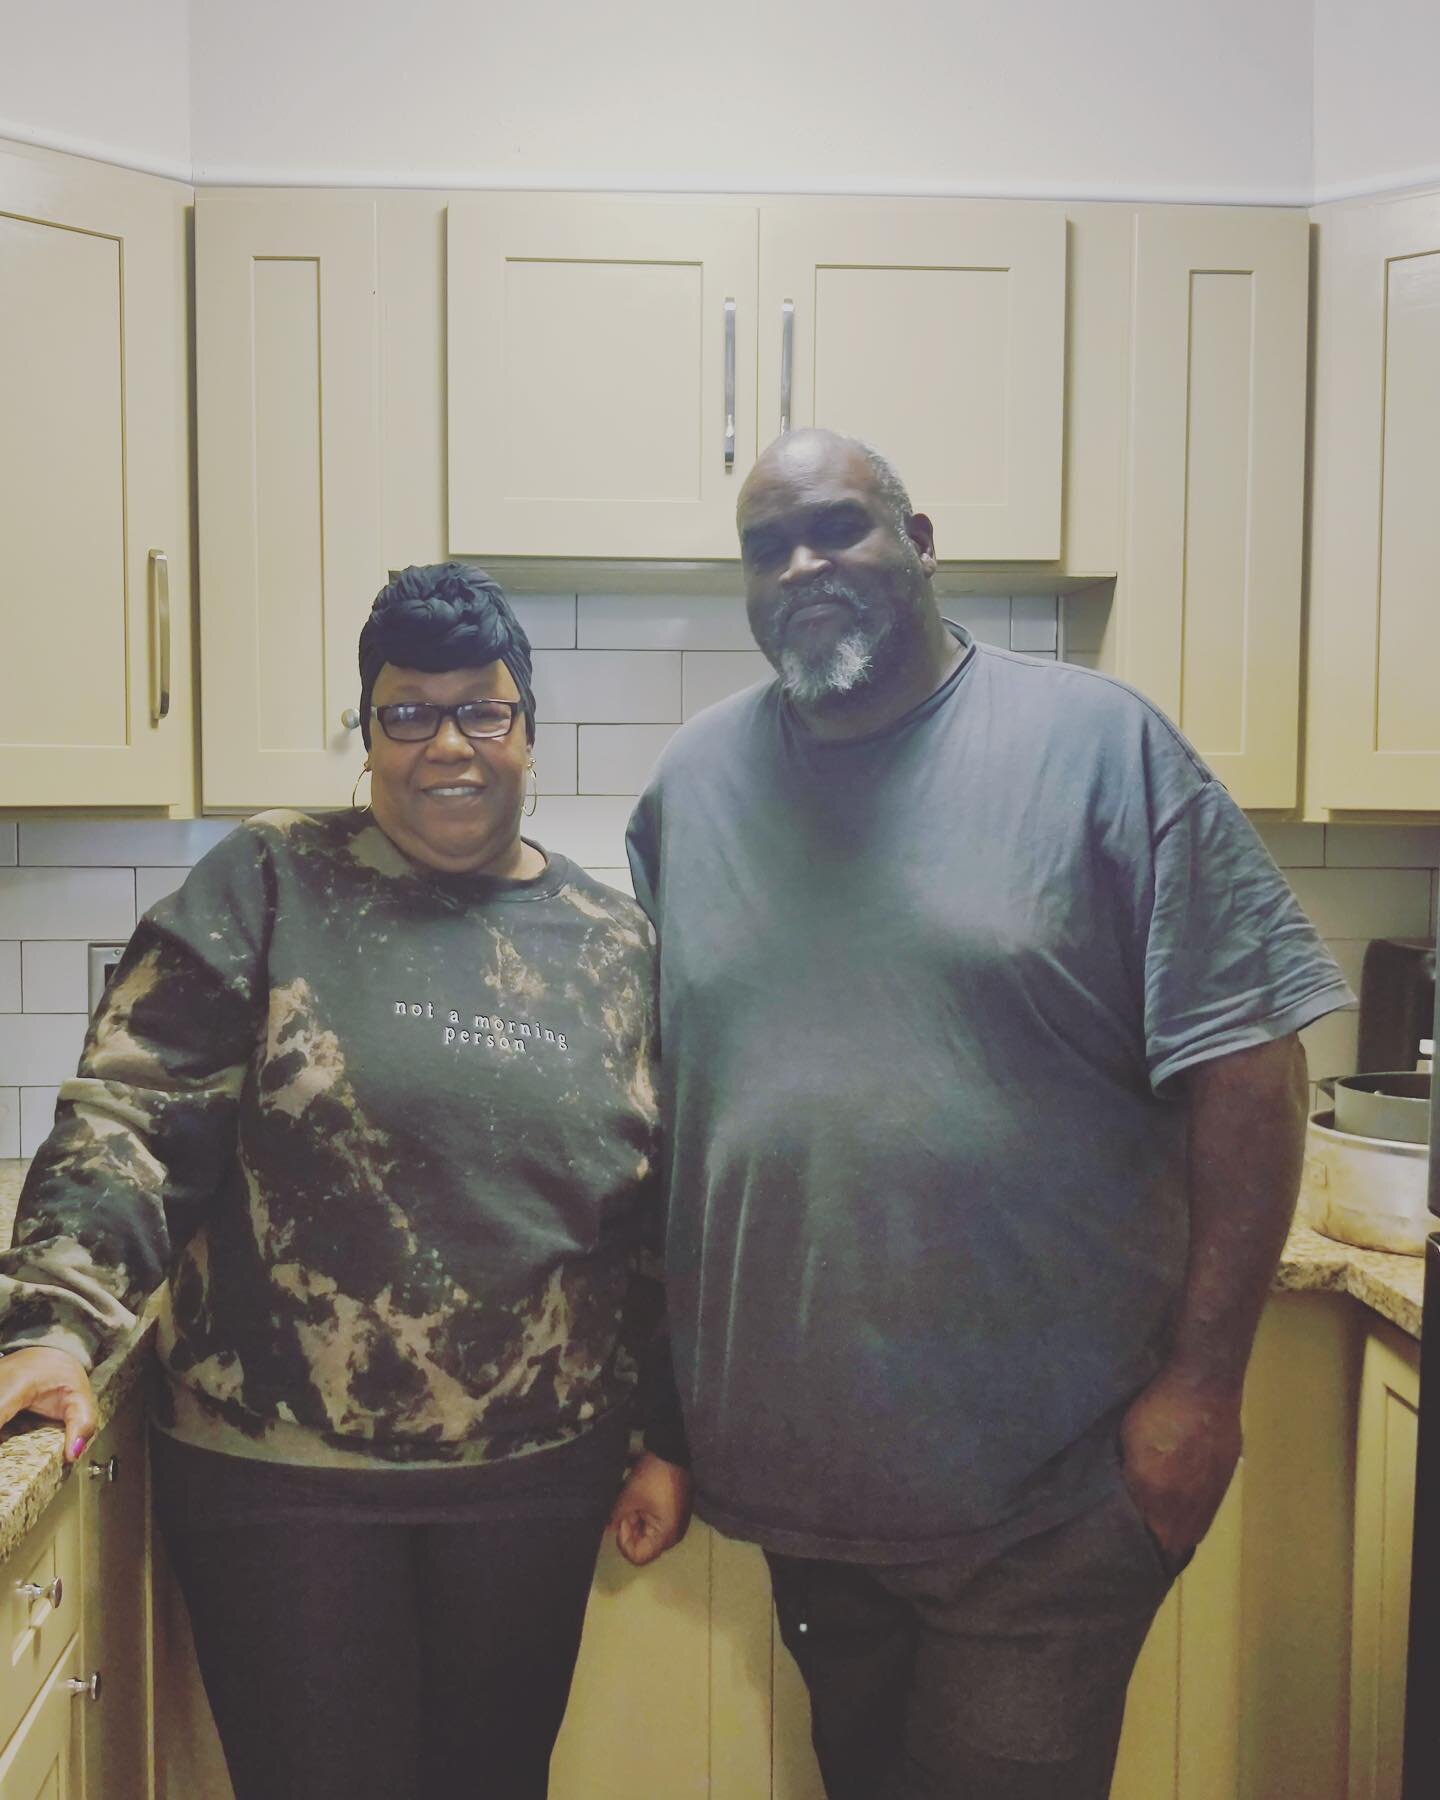 Another completed project and satisfied homeowners!!

We teamed up with Brattain Construction, a Black women-owned construction company here in Portland, and got a lot done for Michelle and Dirk. We replaced:

- the roof
- the kitchen floor (before p